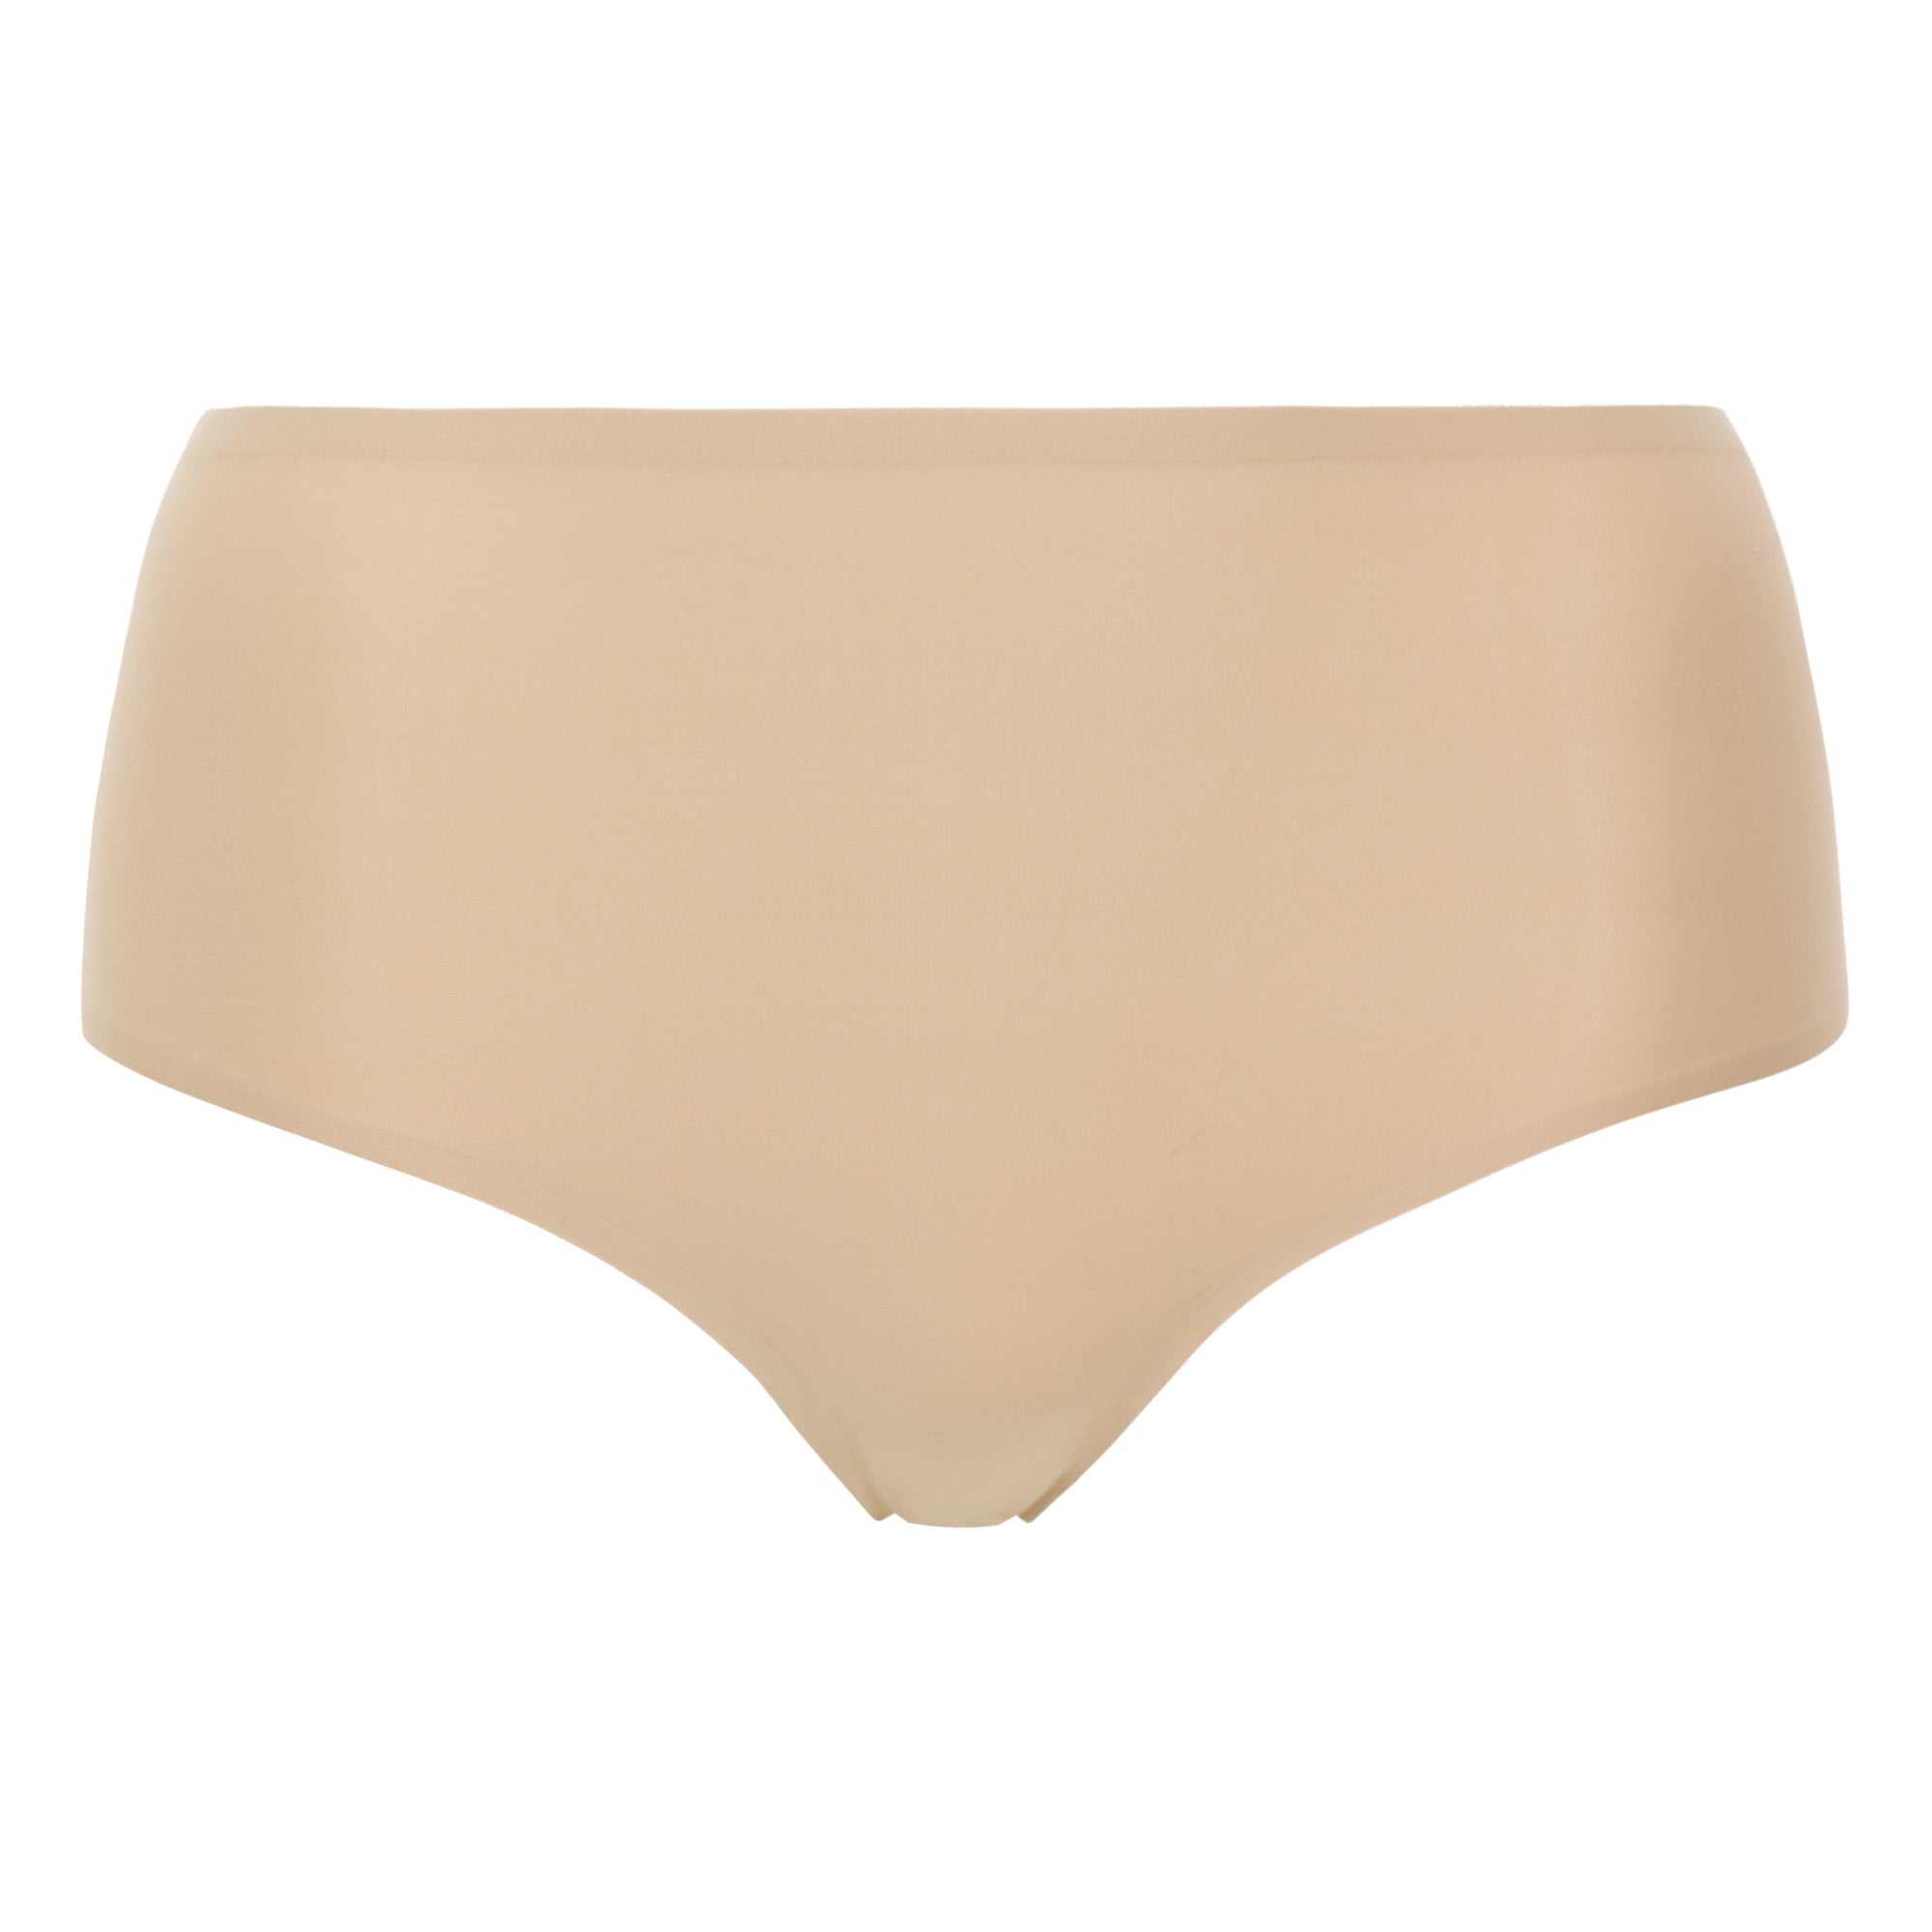 STKOOBQ Women's High Waisted Briefs Sexy Solid Color Anti Glare